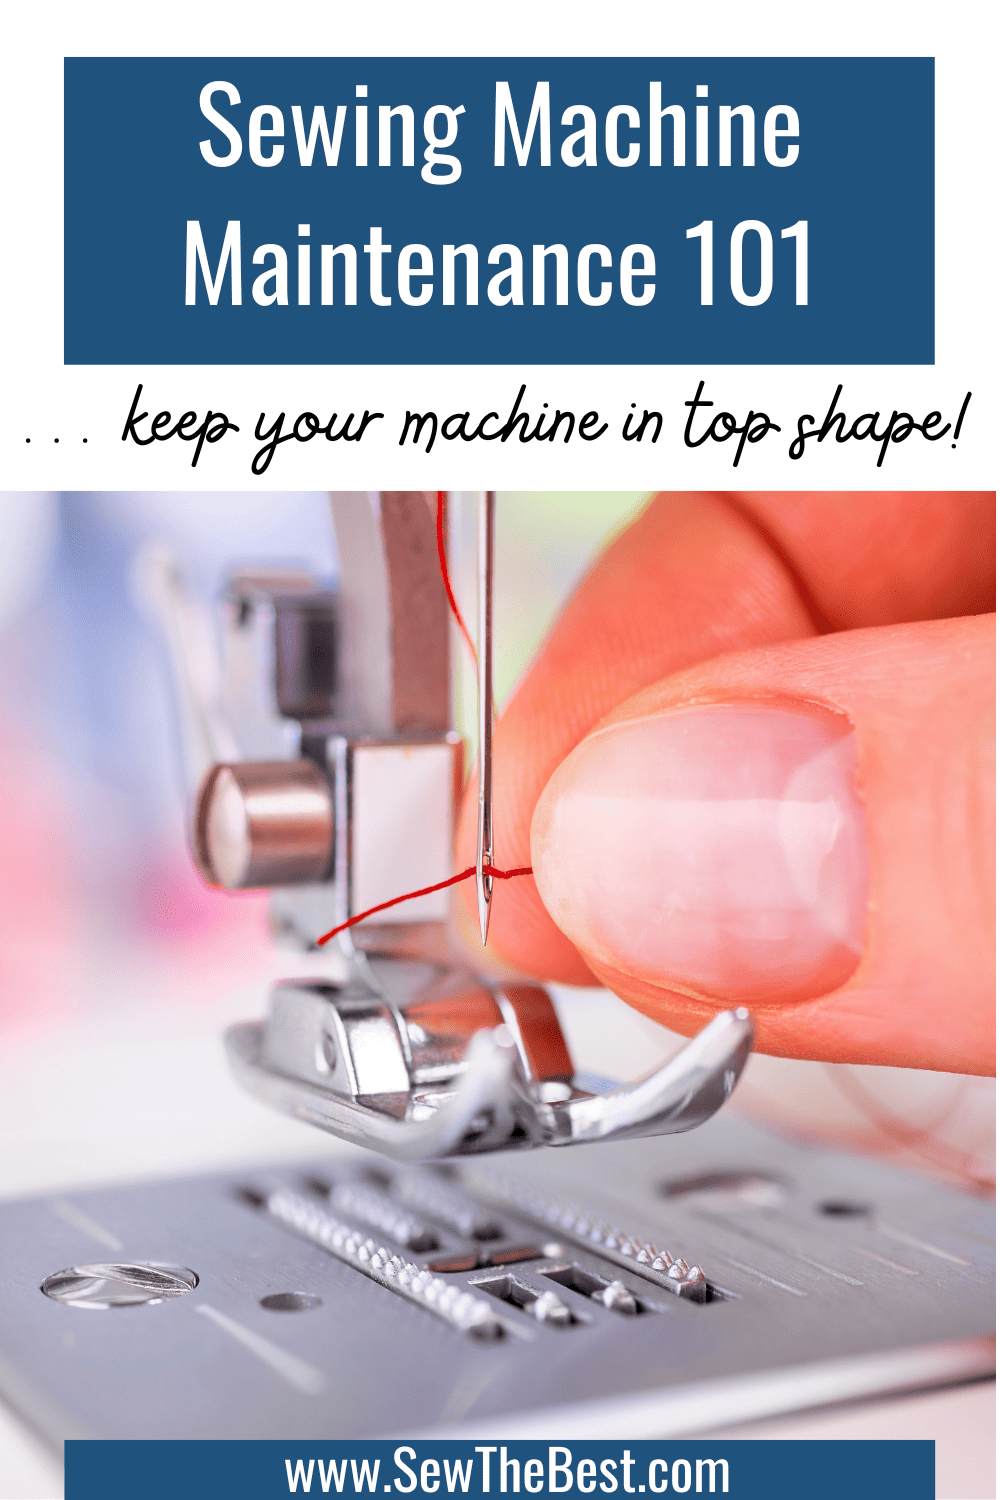 Sewing Machine Maintenance 101 ... keep your machine in top shape! Picture of threading a sewing machine needle follows.